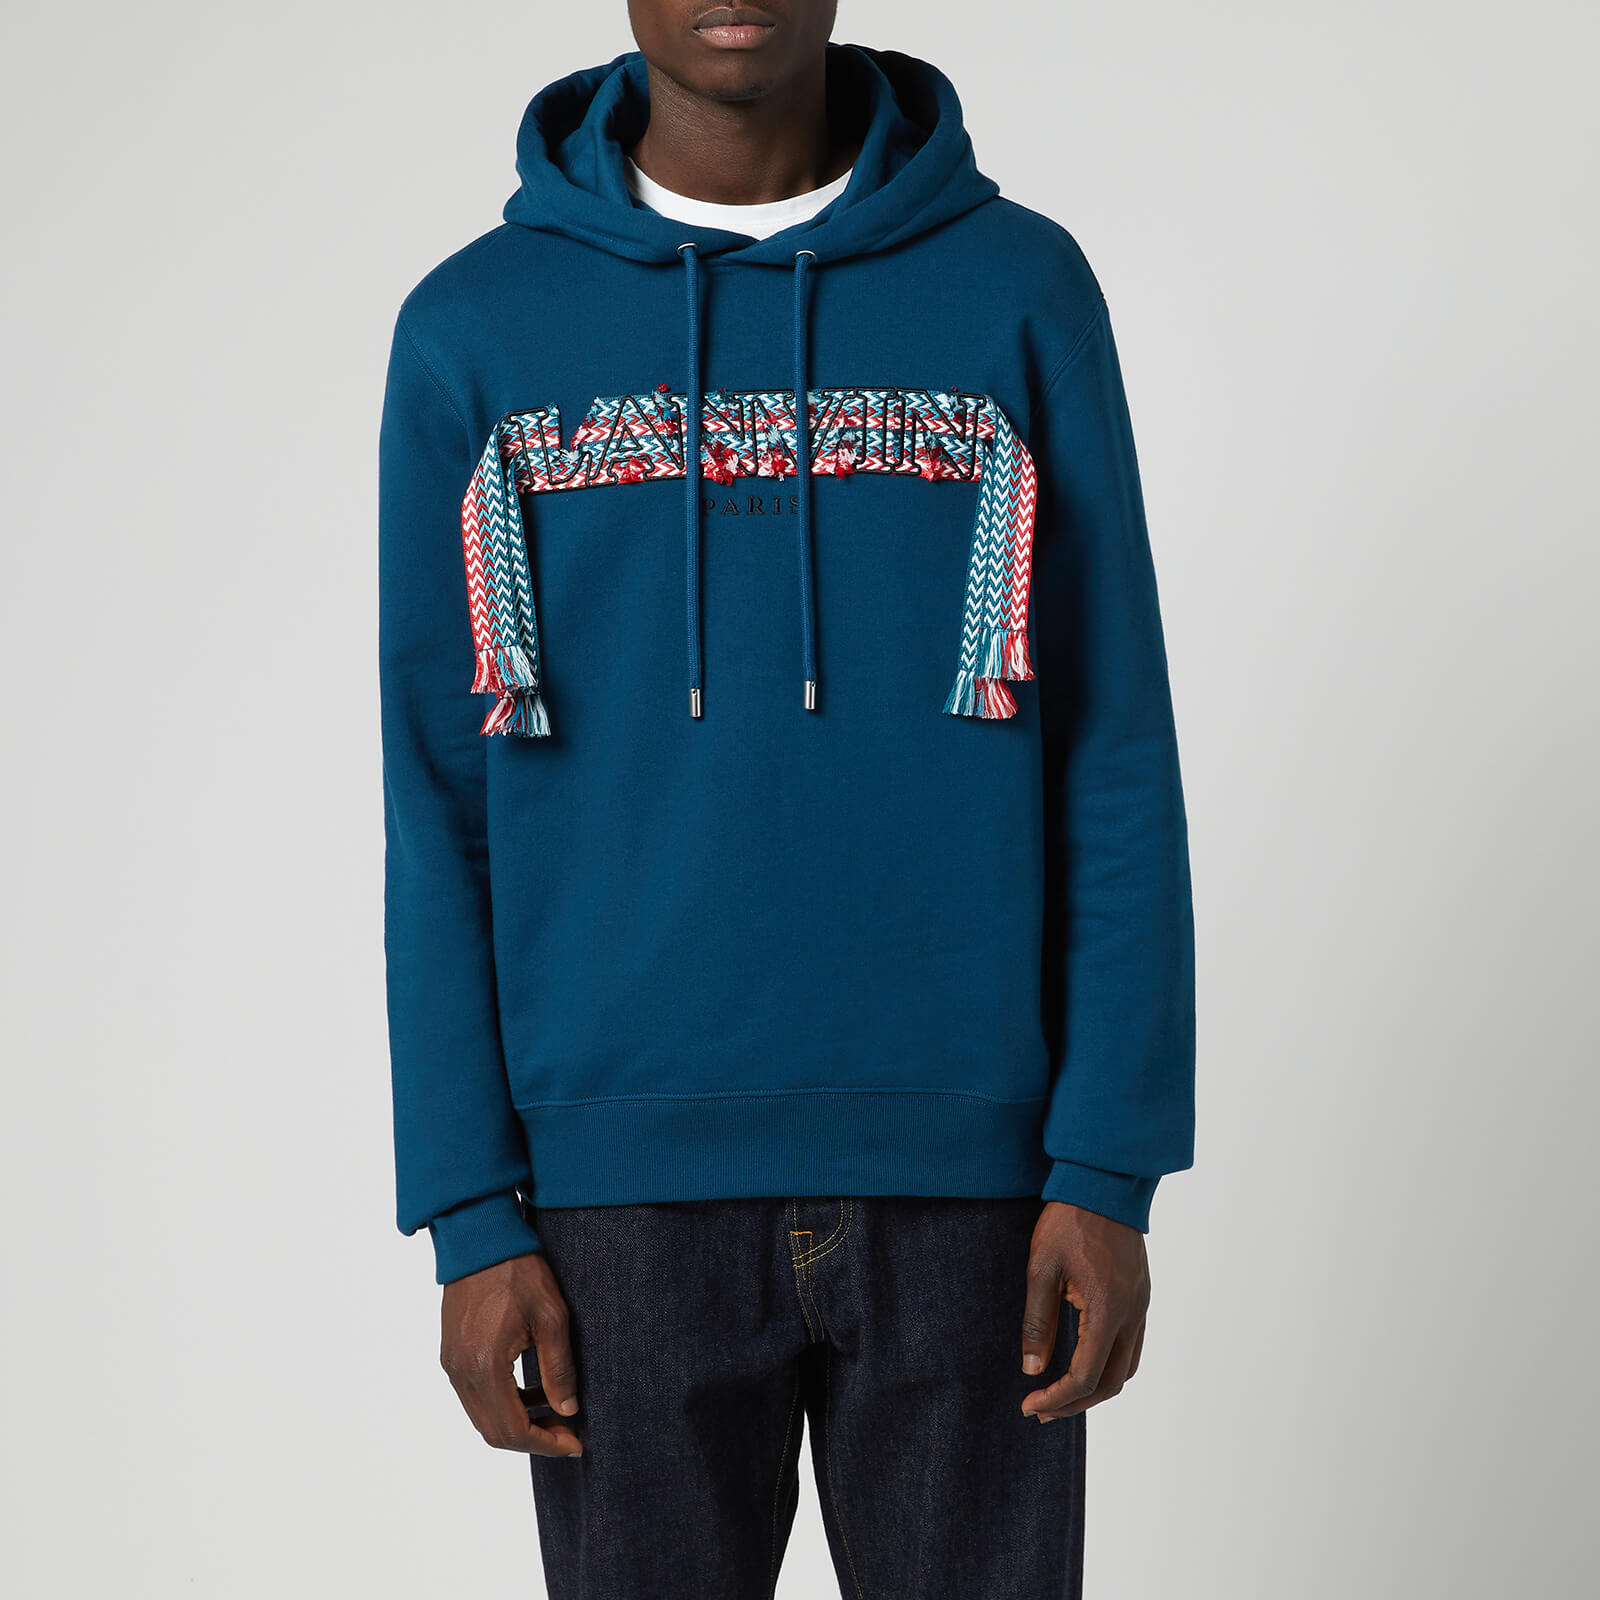 Lanvin Men's Embroidered Curb Hoodie - Petrol Blue - S